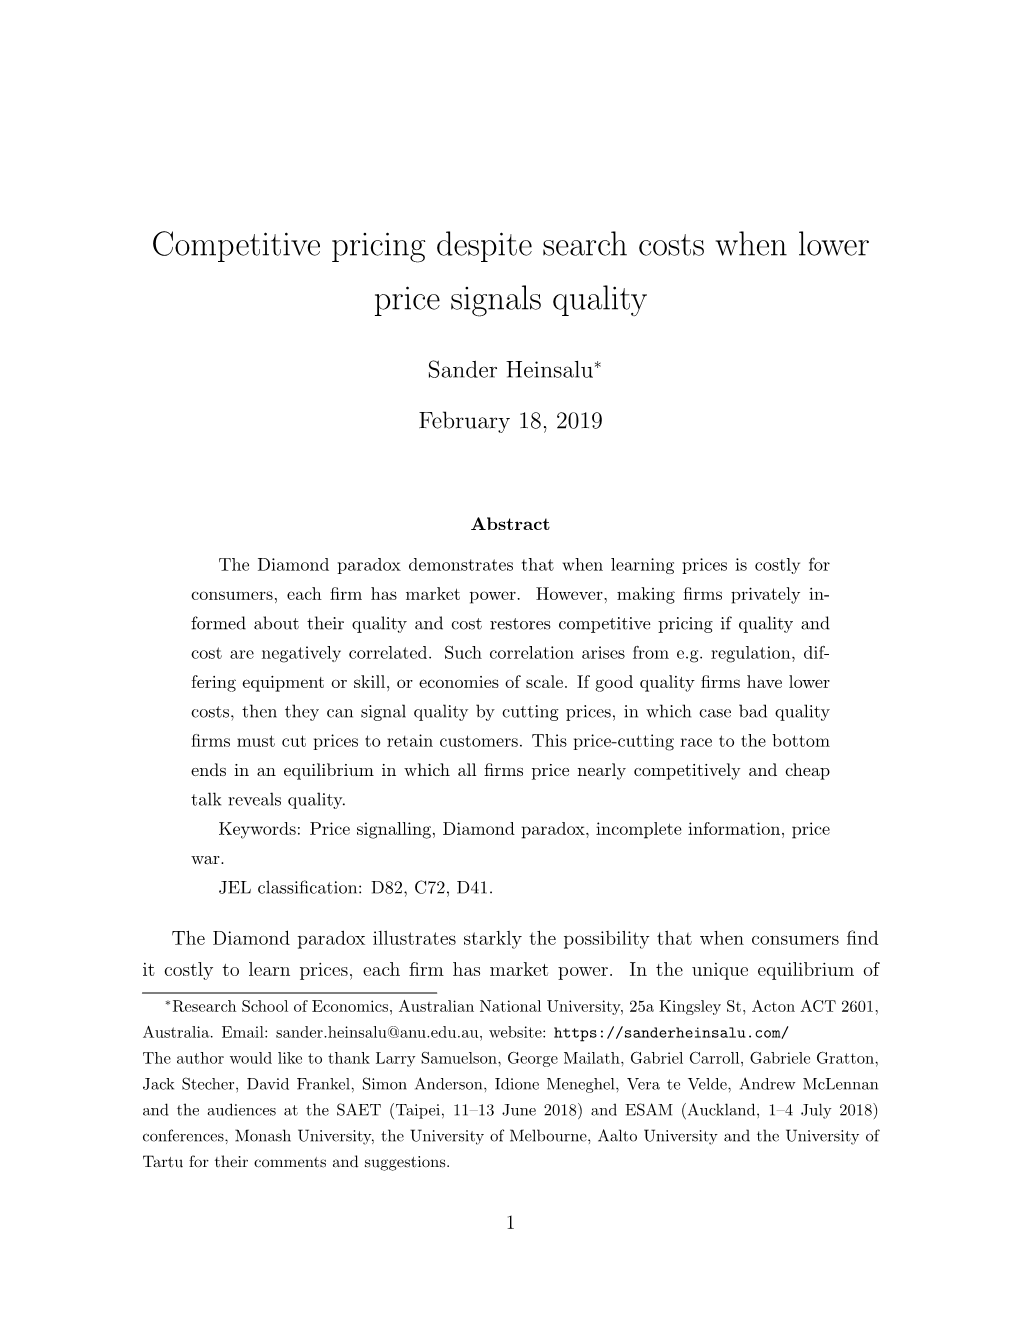 Competitive Pricing Despite Search Costs When Lower Price Signals Quality